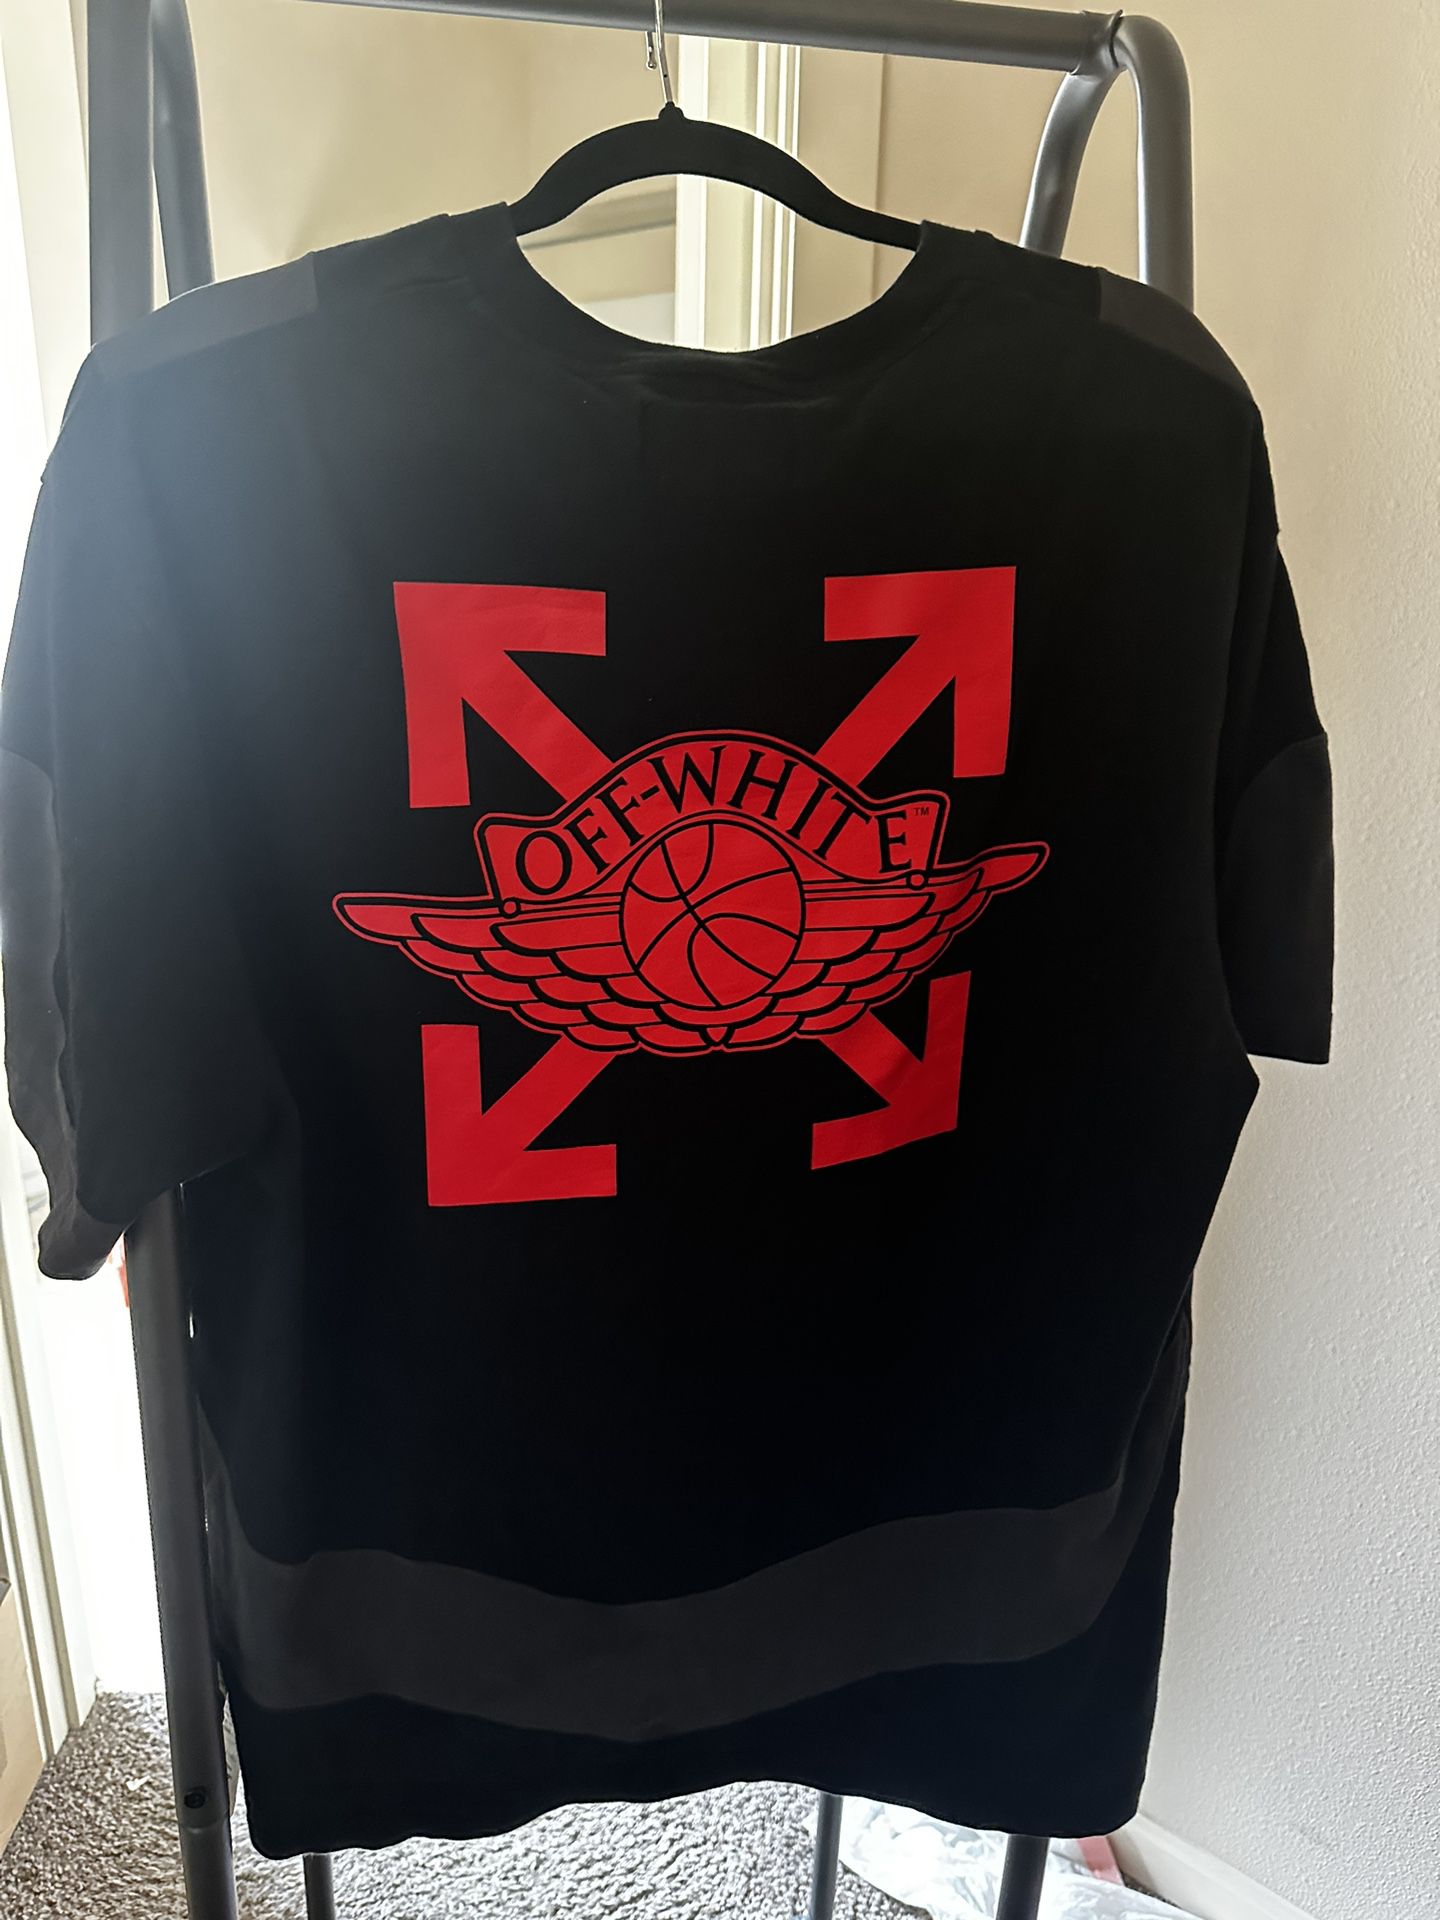 Jordan Off White Shirt for Sale in Vancouver, WA - OfferUp